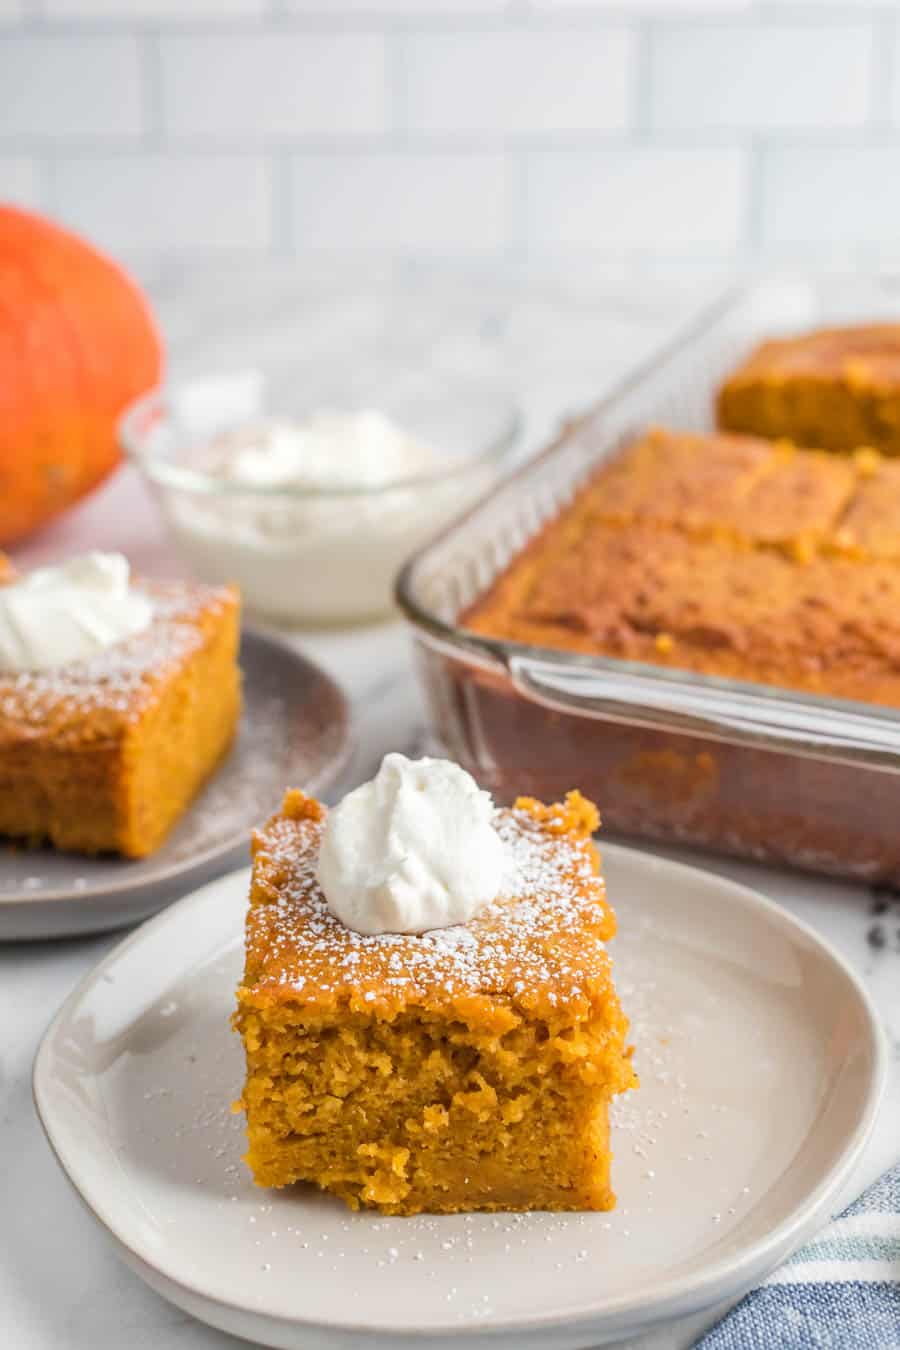 square servings of extra thick pumpkin cake on plates next to the baking dish